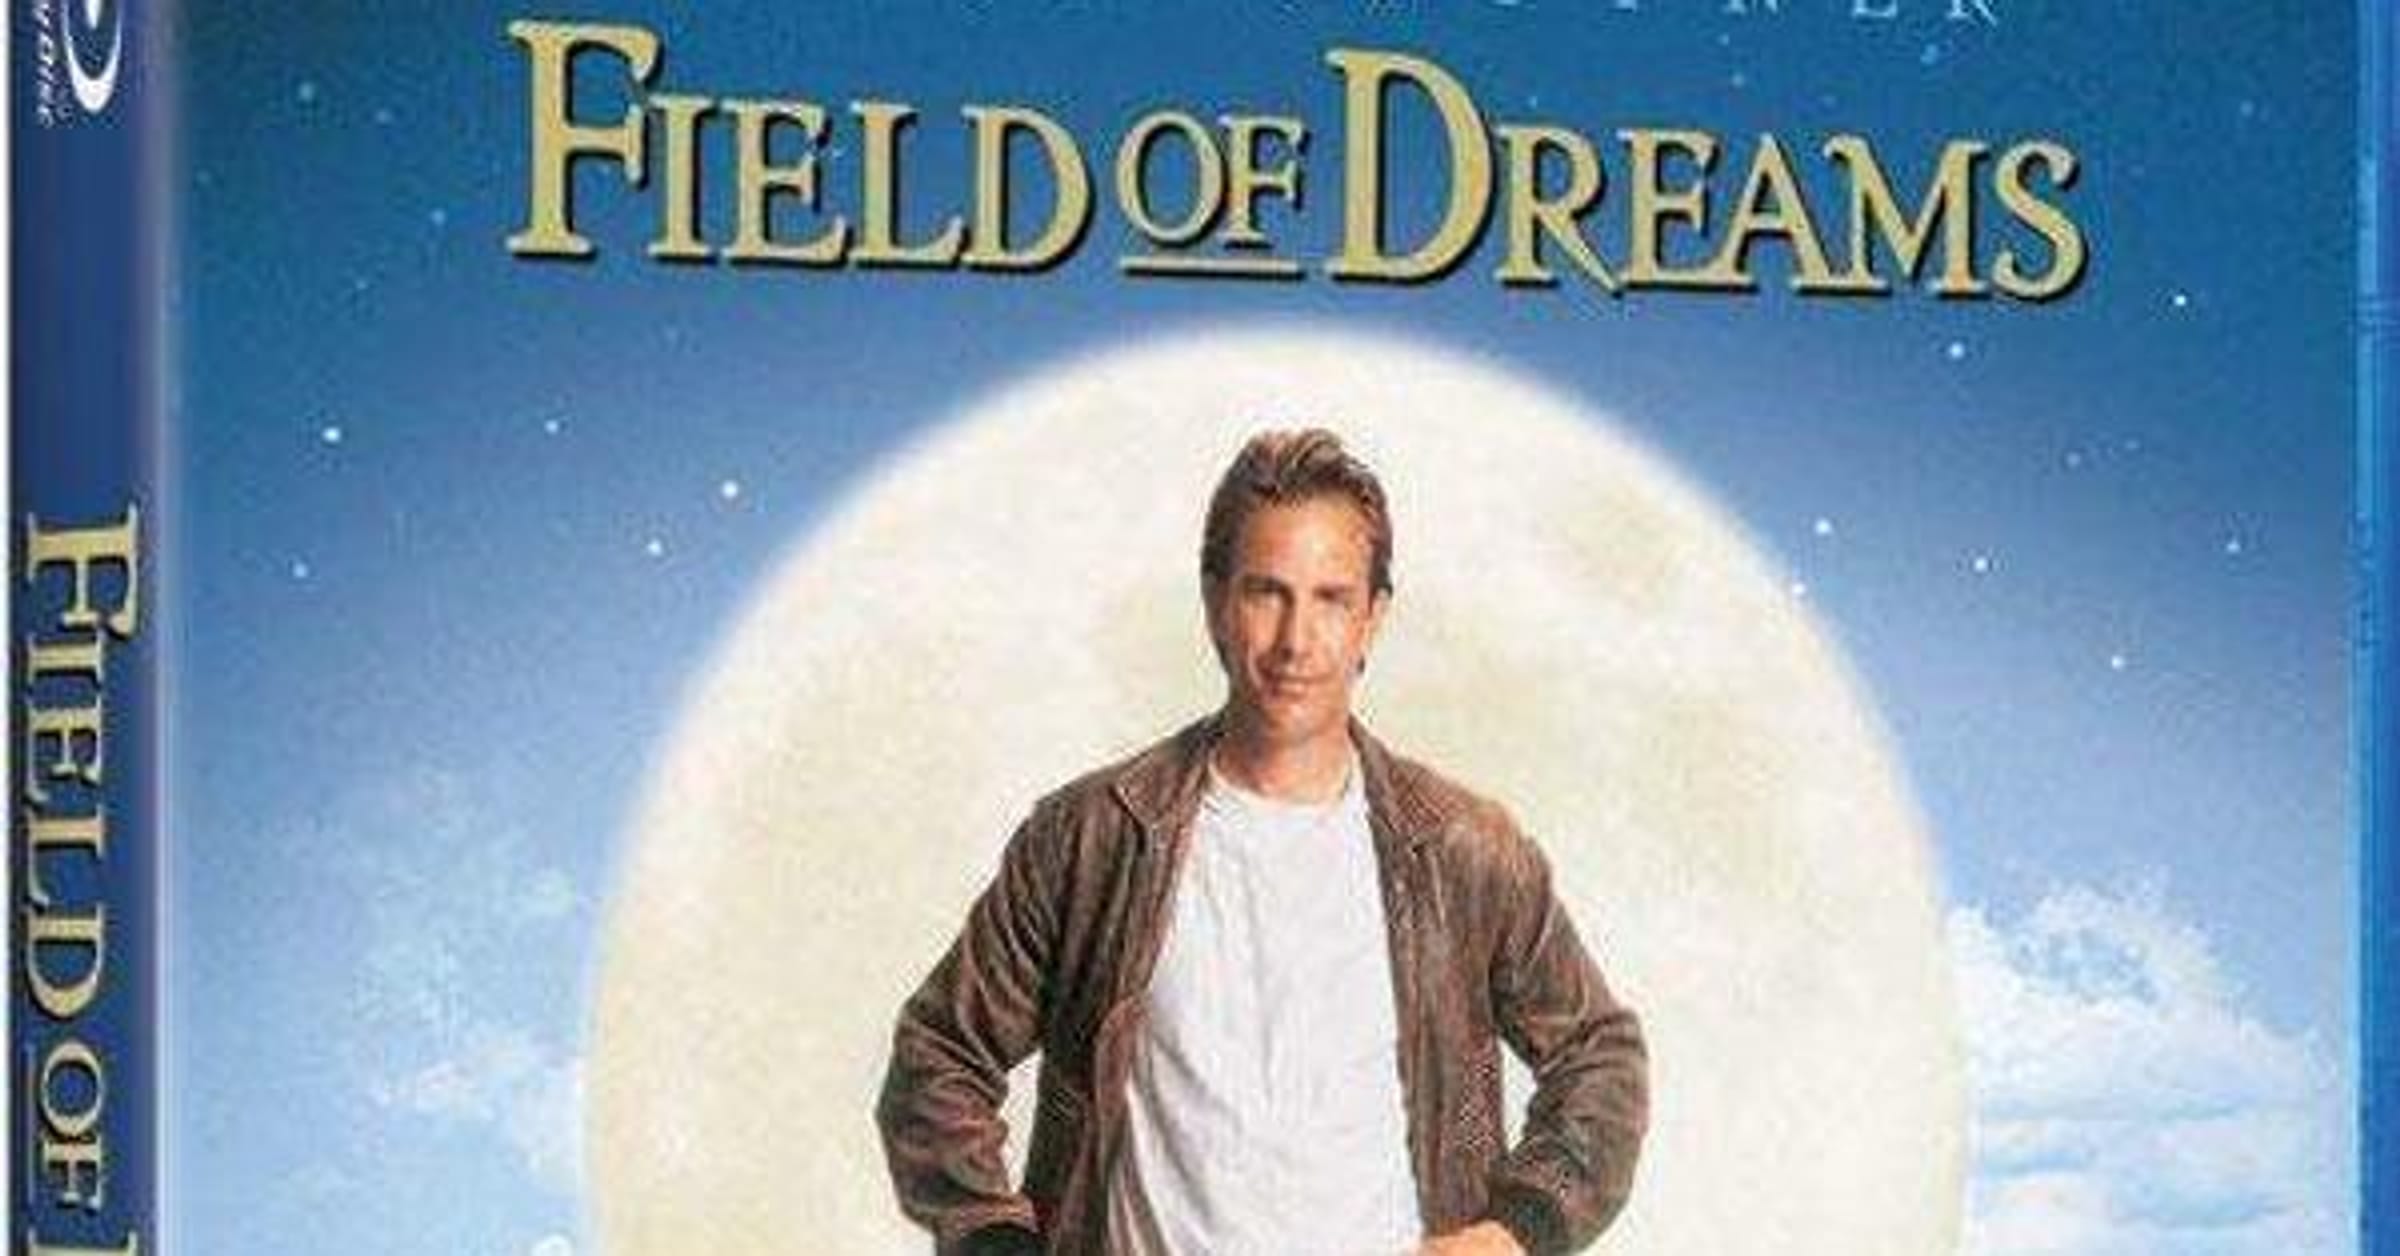 Field Of Dreams Cast List: Actors and Actresses from Field Of Dreams